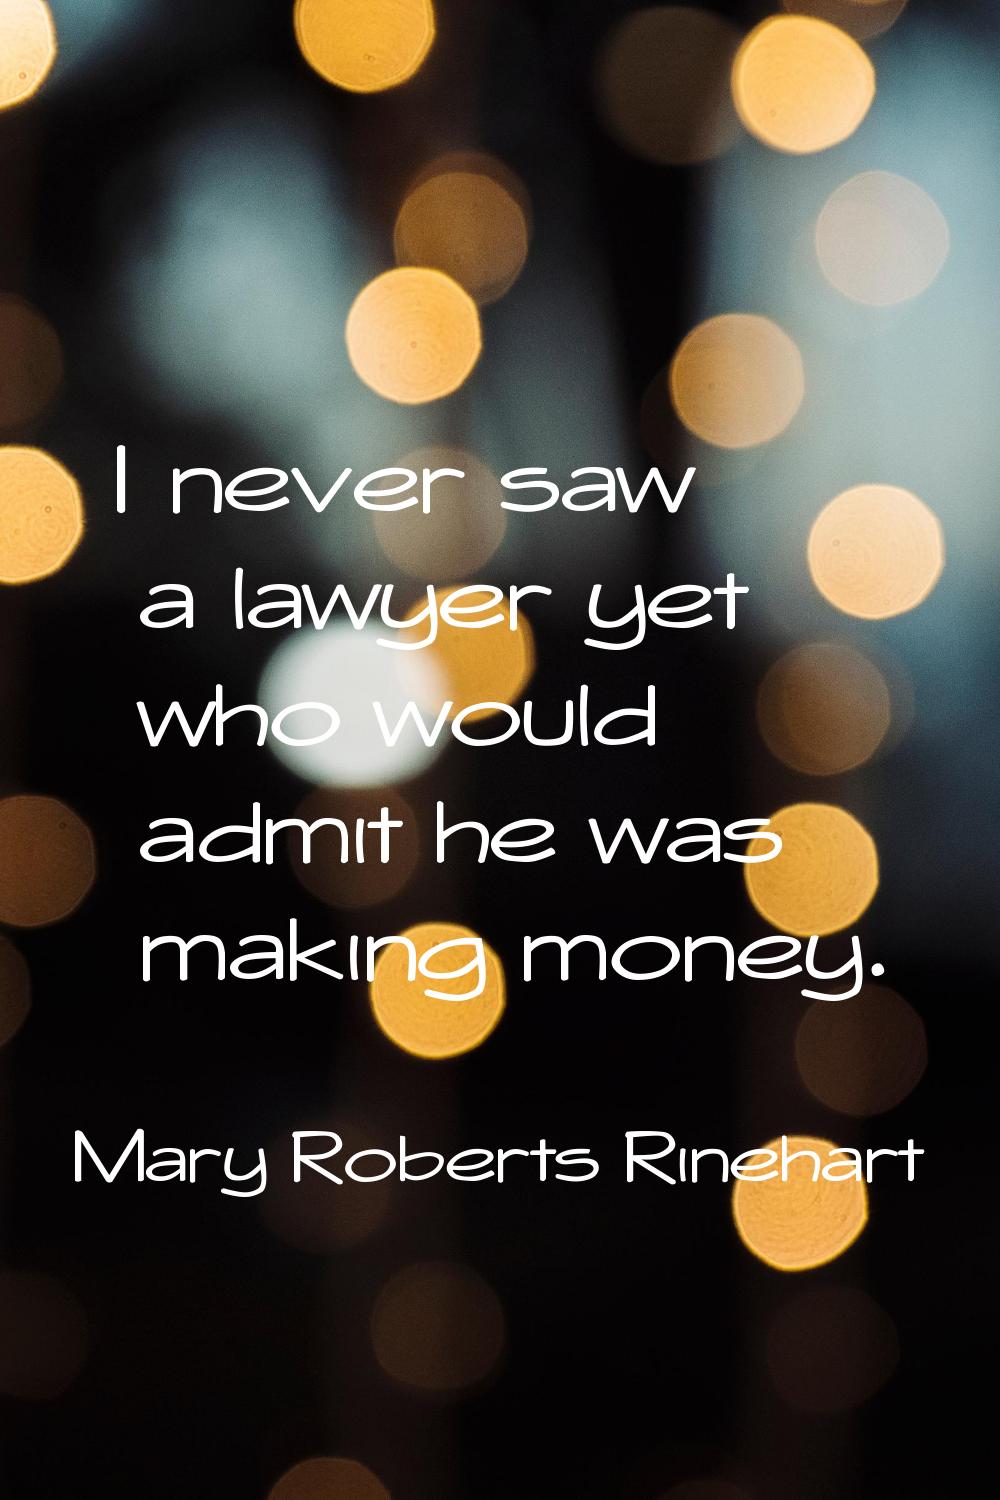 I never saw a lawyer yet who would admit he was making money.